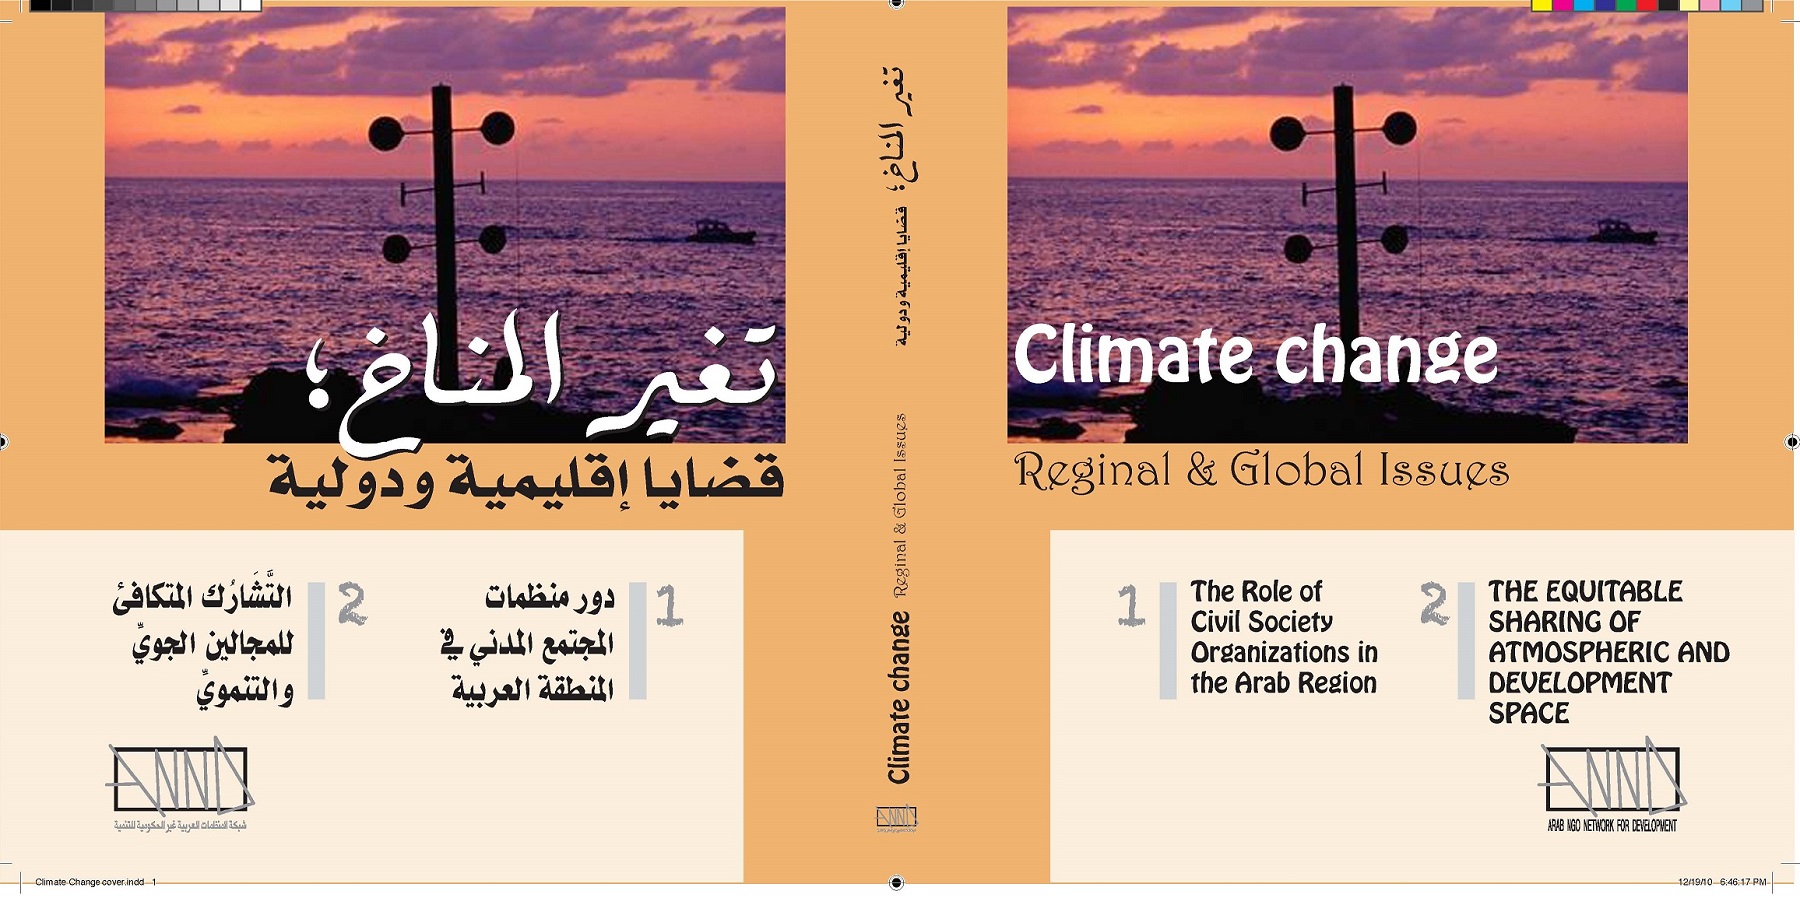 Climate Change, Regional and Global Issues 2011